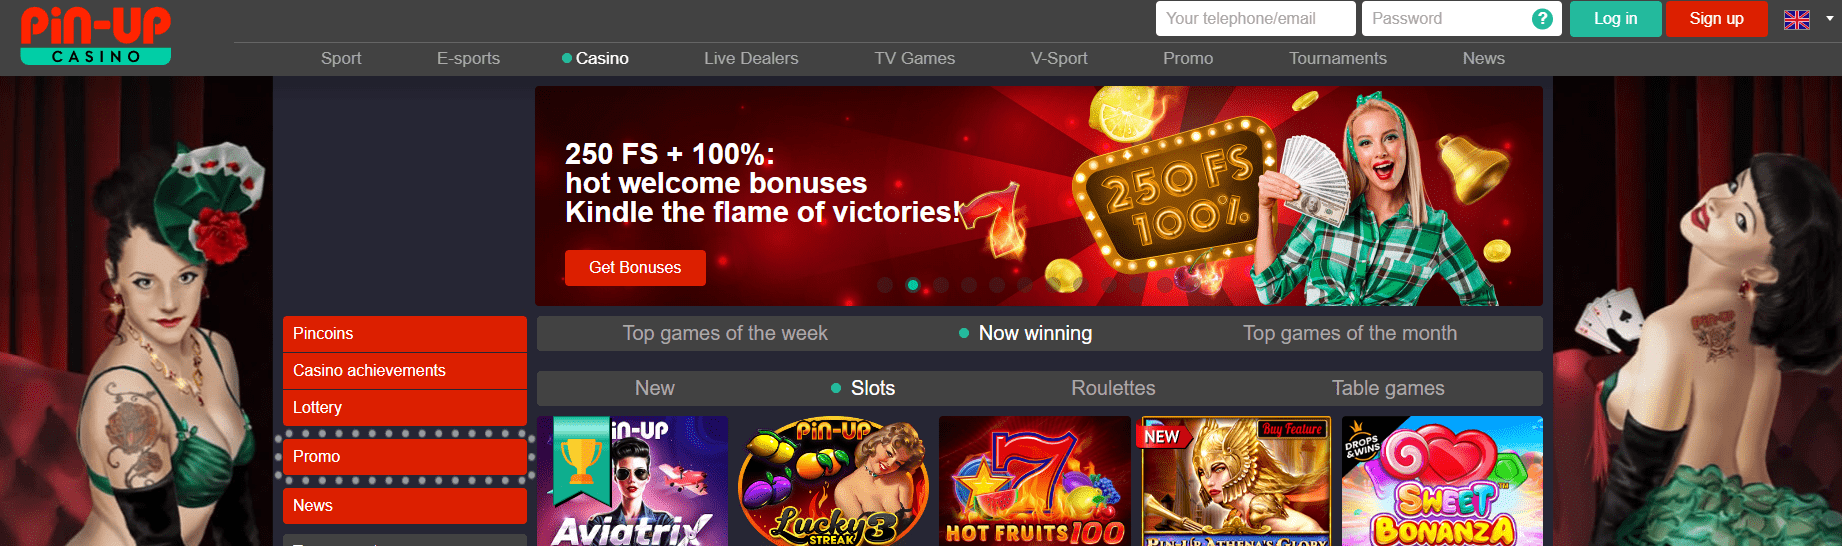 Pin-Up Casino Official Site